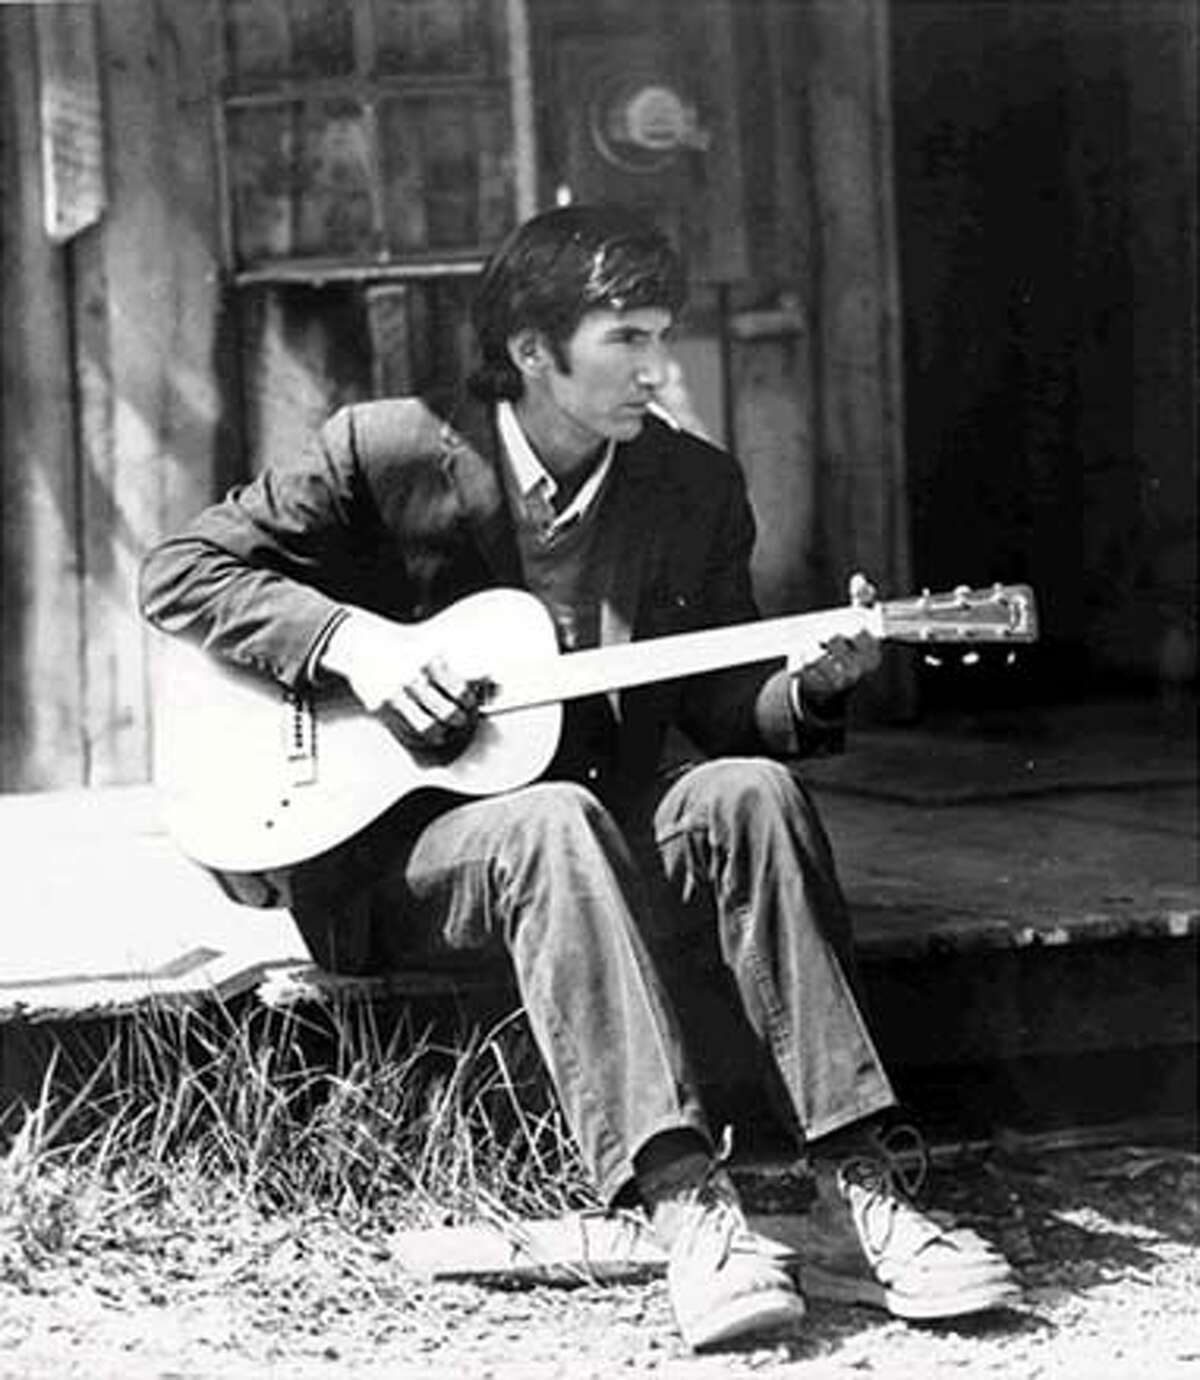 Townes Van Zandt in Palm Pictures film Be Here to Love Me: A Film about Townes Van Zandt.